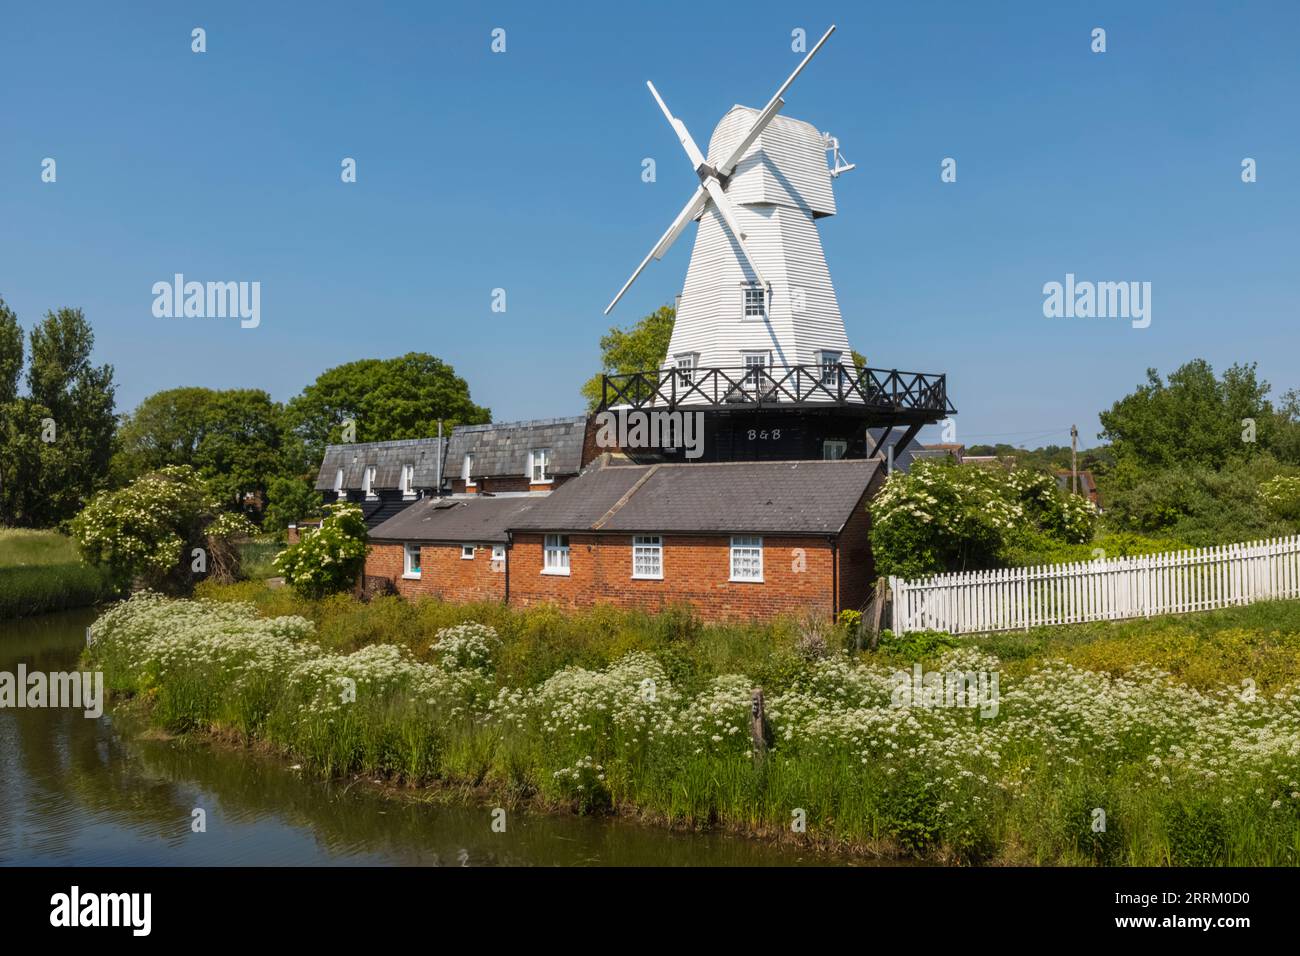 Inghilterra, Sussex, East Sussex, Rye, The Windmill B&B e River Rother Foto Stock